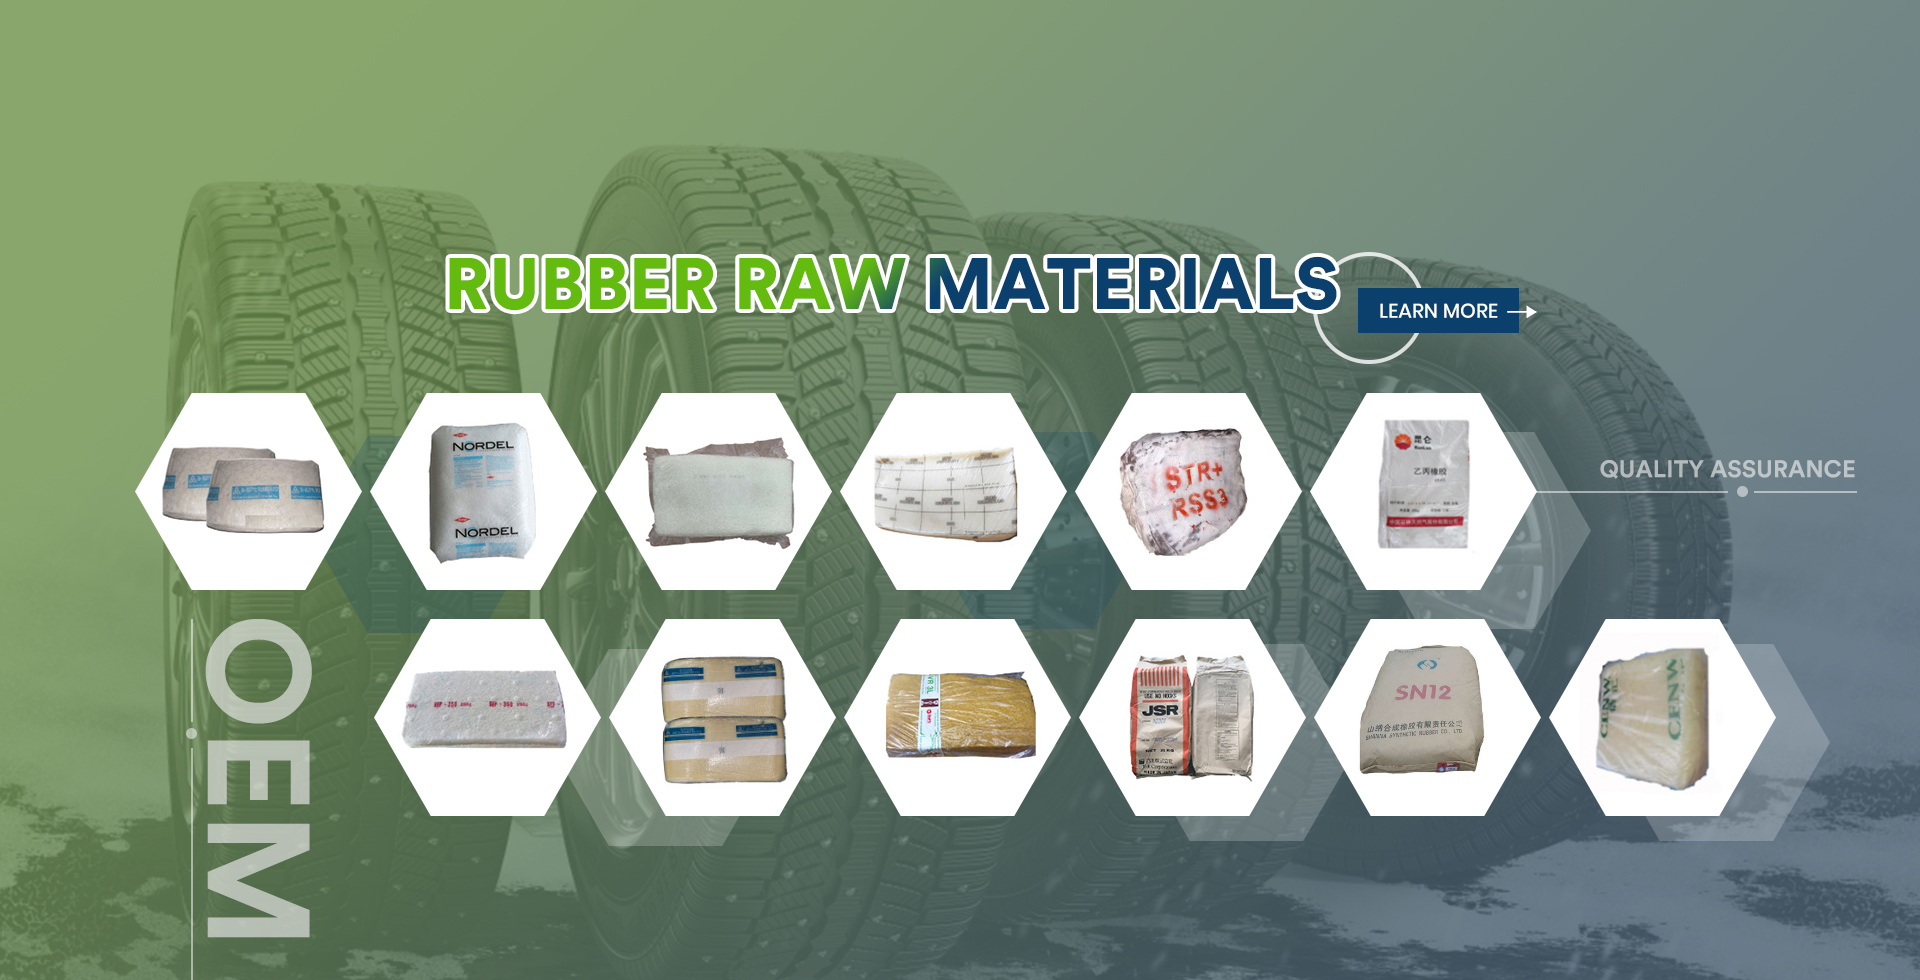 Rubber raw materials